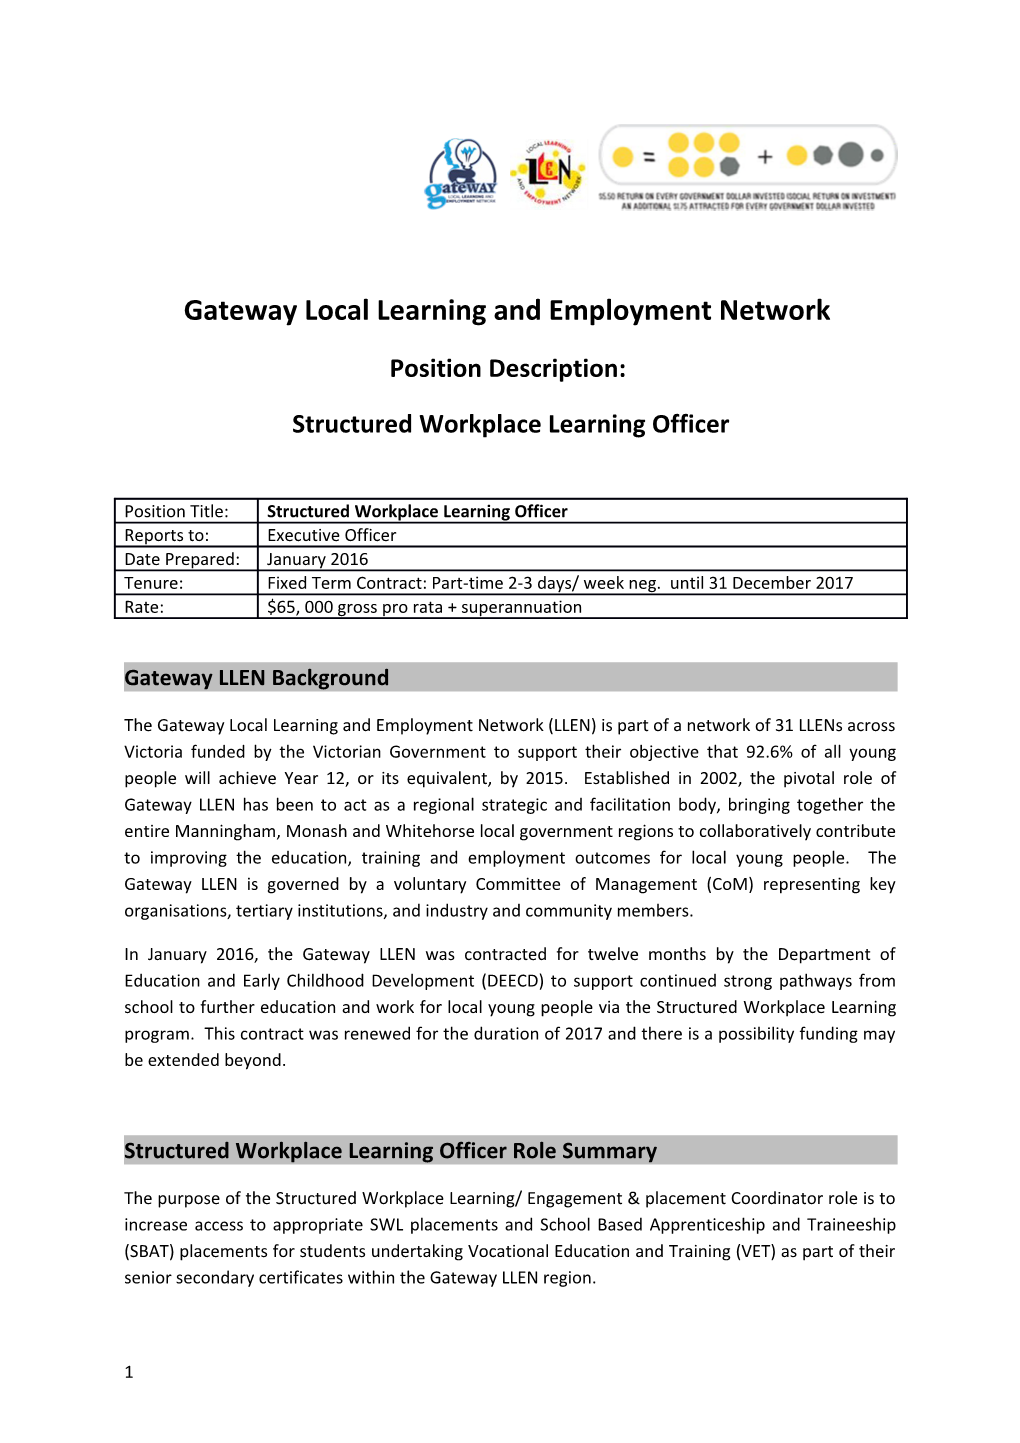 Gateway Local Learning and Employment Network